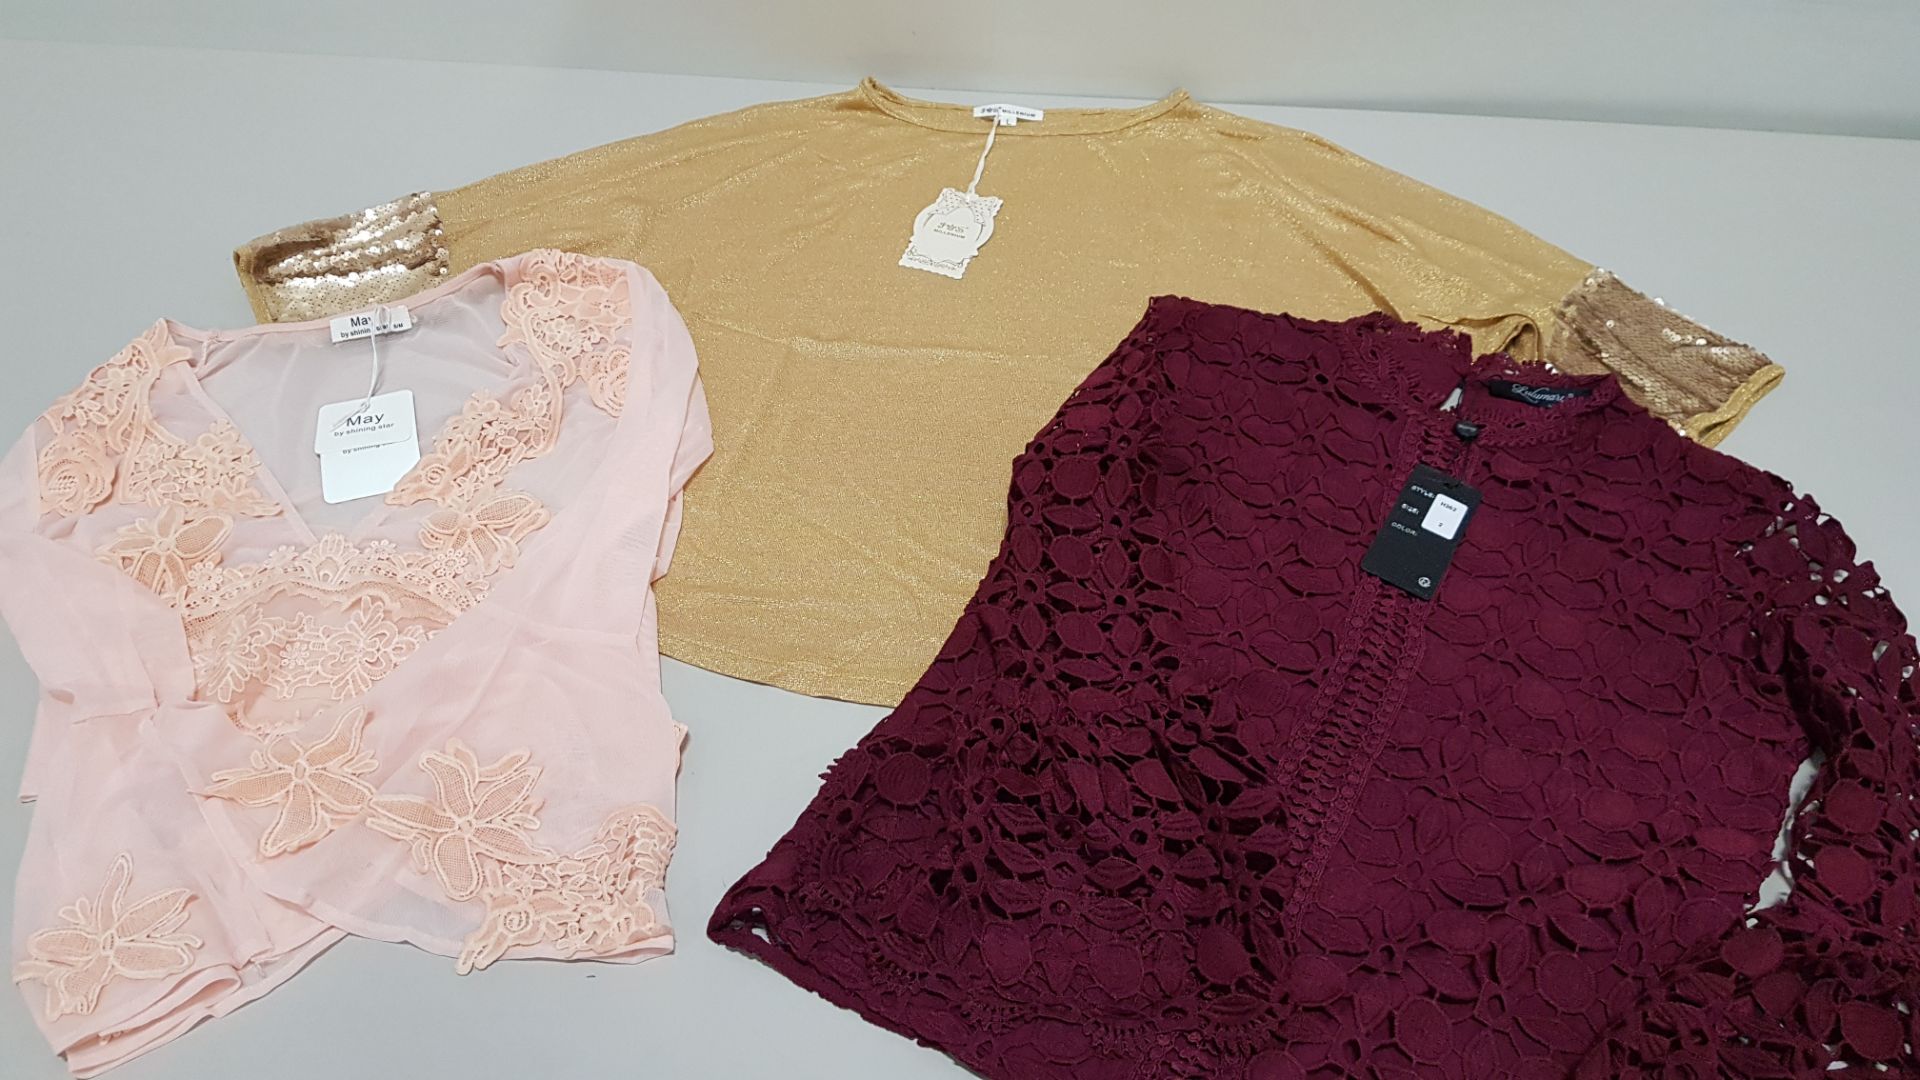 30 PIECE CLOTHING LOT CONTAINING MAY NUDE TOPS, LULU MARY MAROON DRESSES AND MAY RED DRESSES ETC